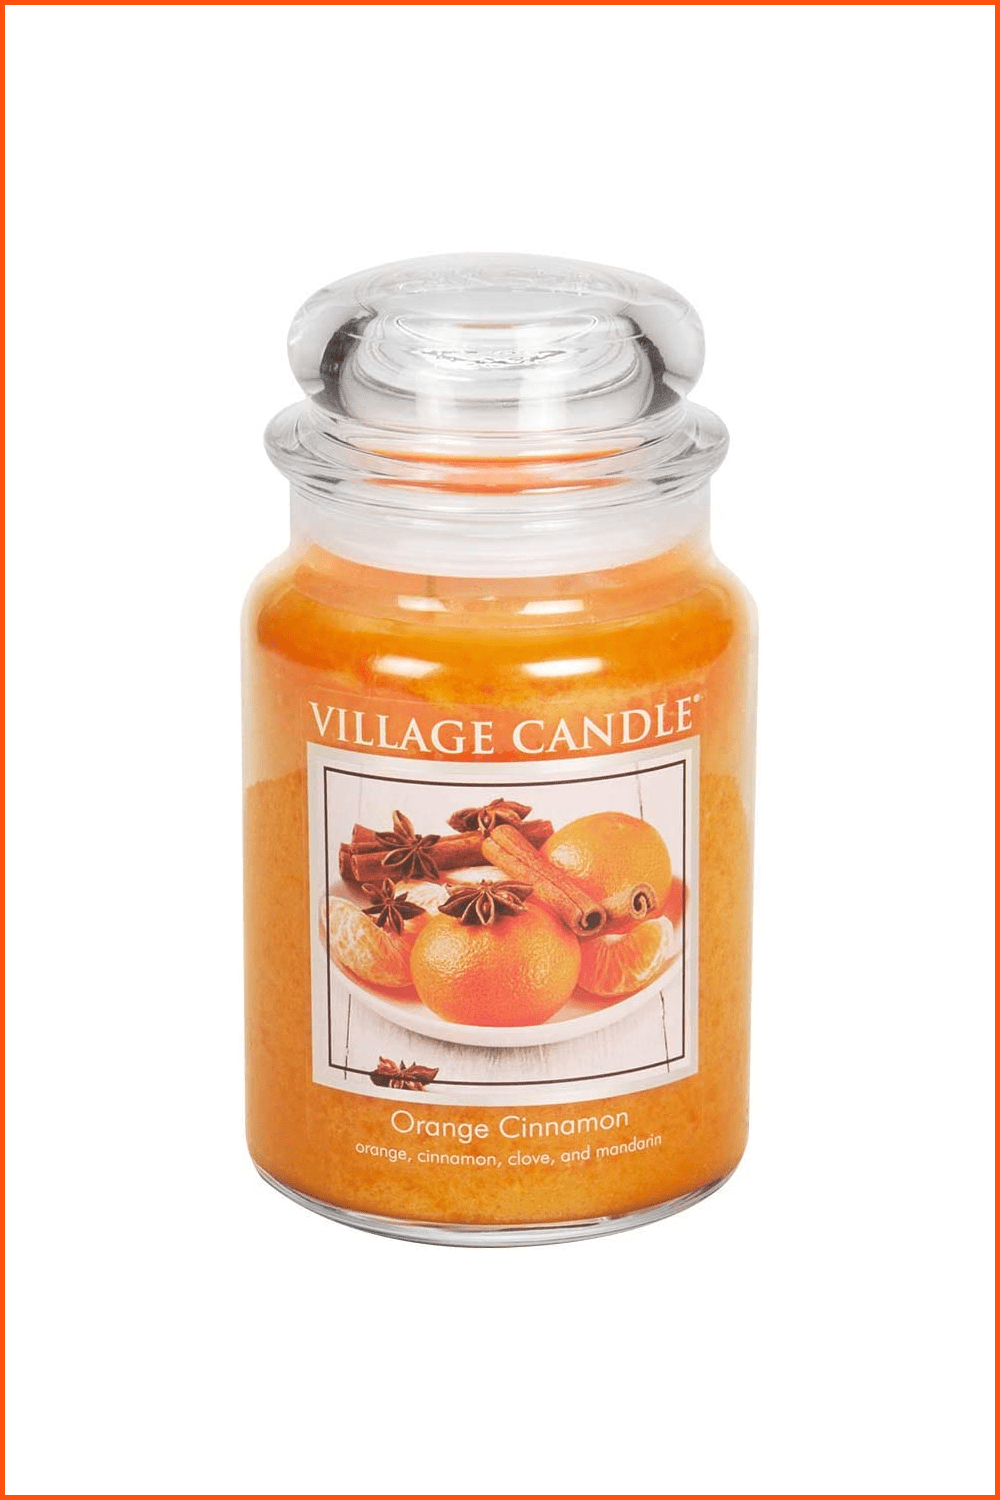 Orange wax candle with oranges and cinnamon sticks.